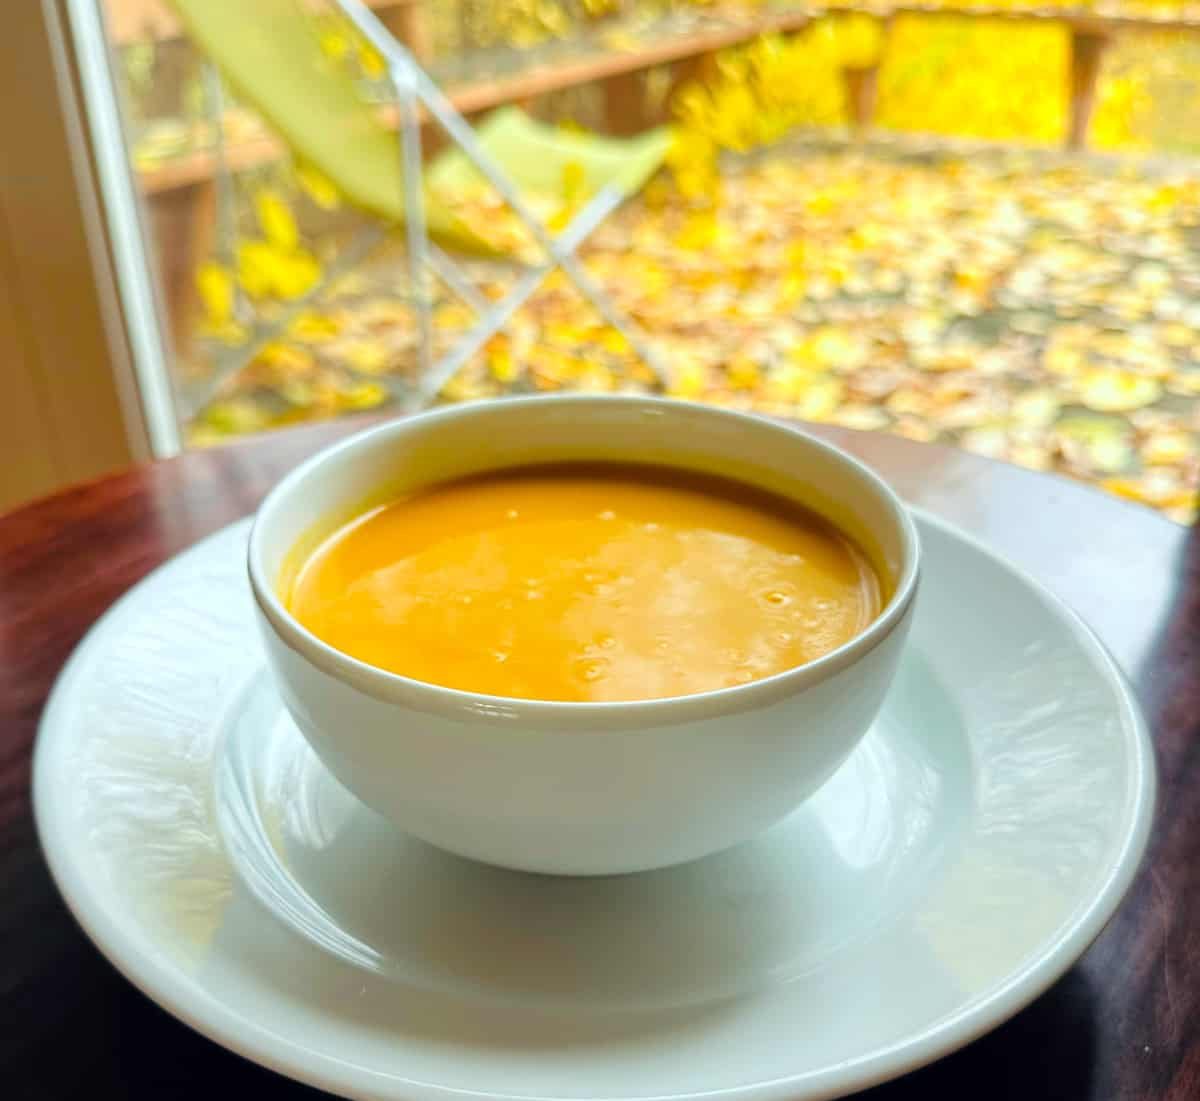 Creamy carrot soup in a white bowl sitting on a dark wood table in front of a window looking out on a lawn chair sitting on a deck covered in yellow leaves.